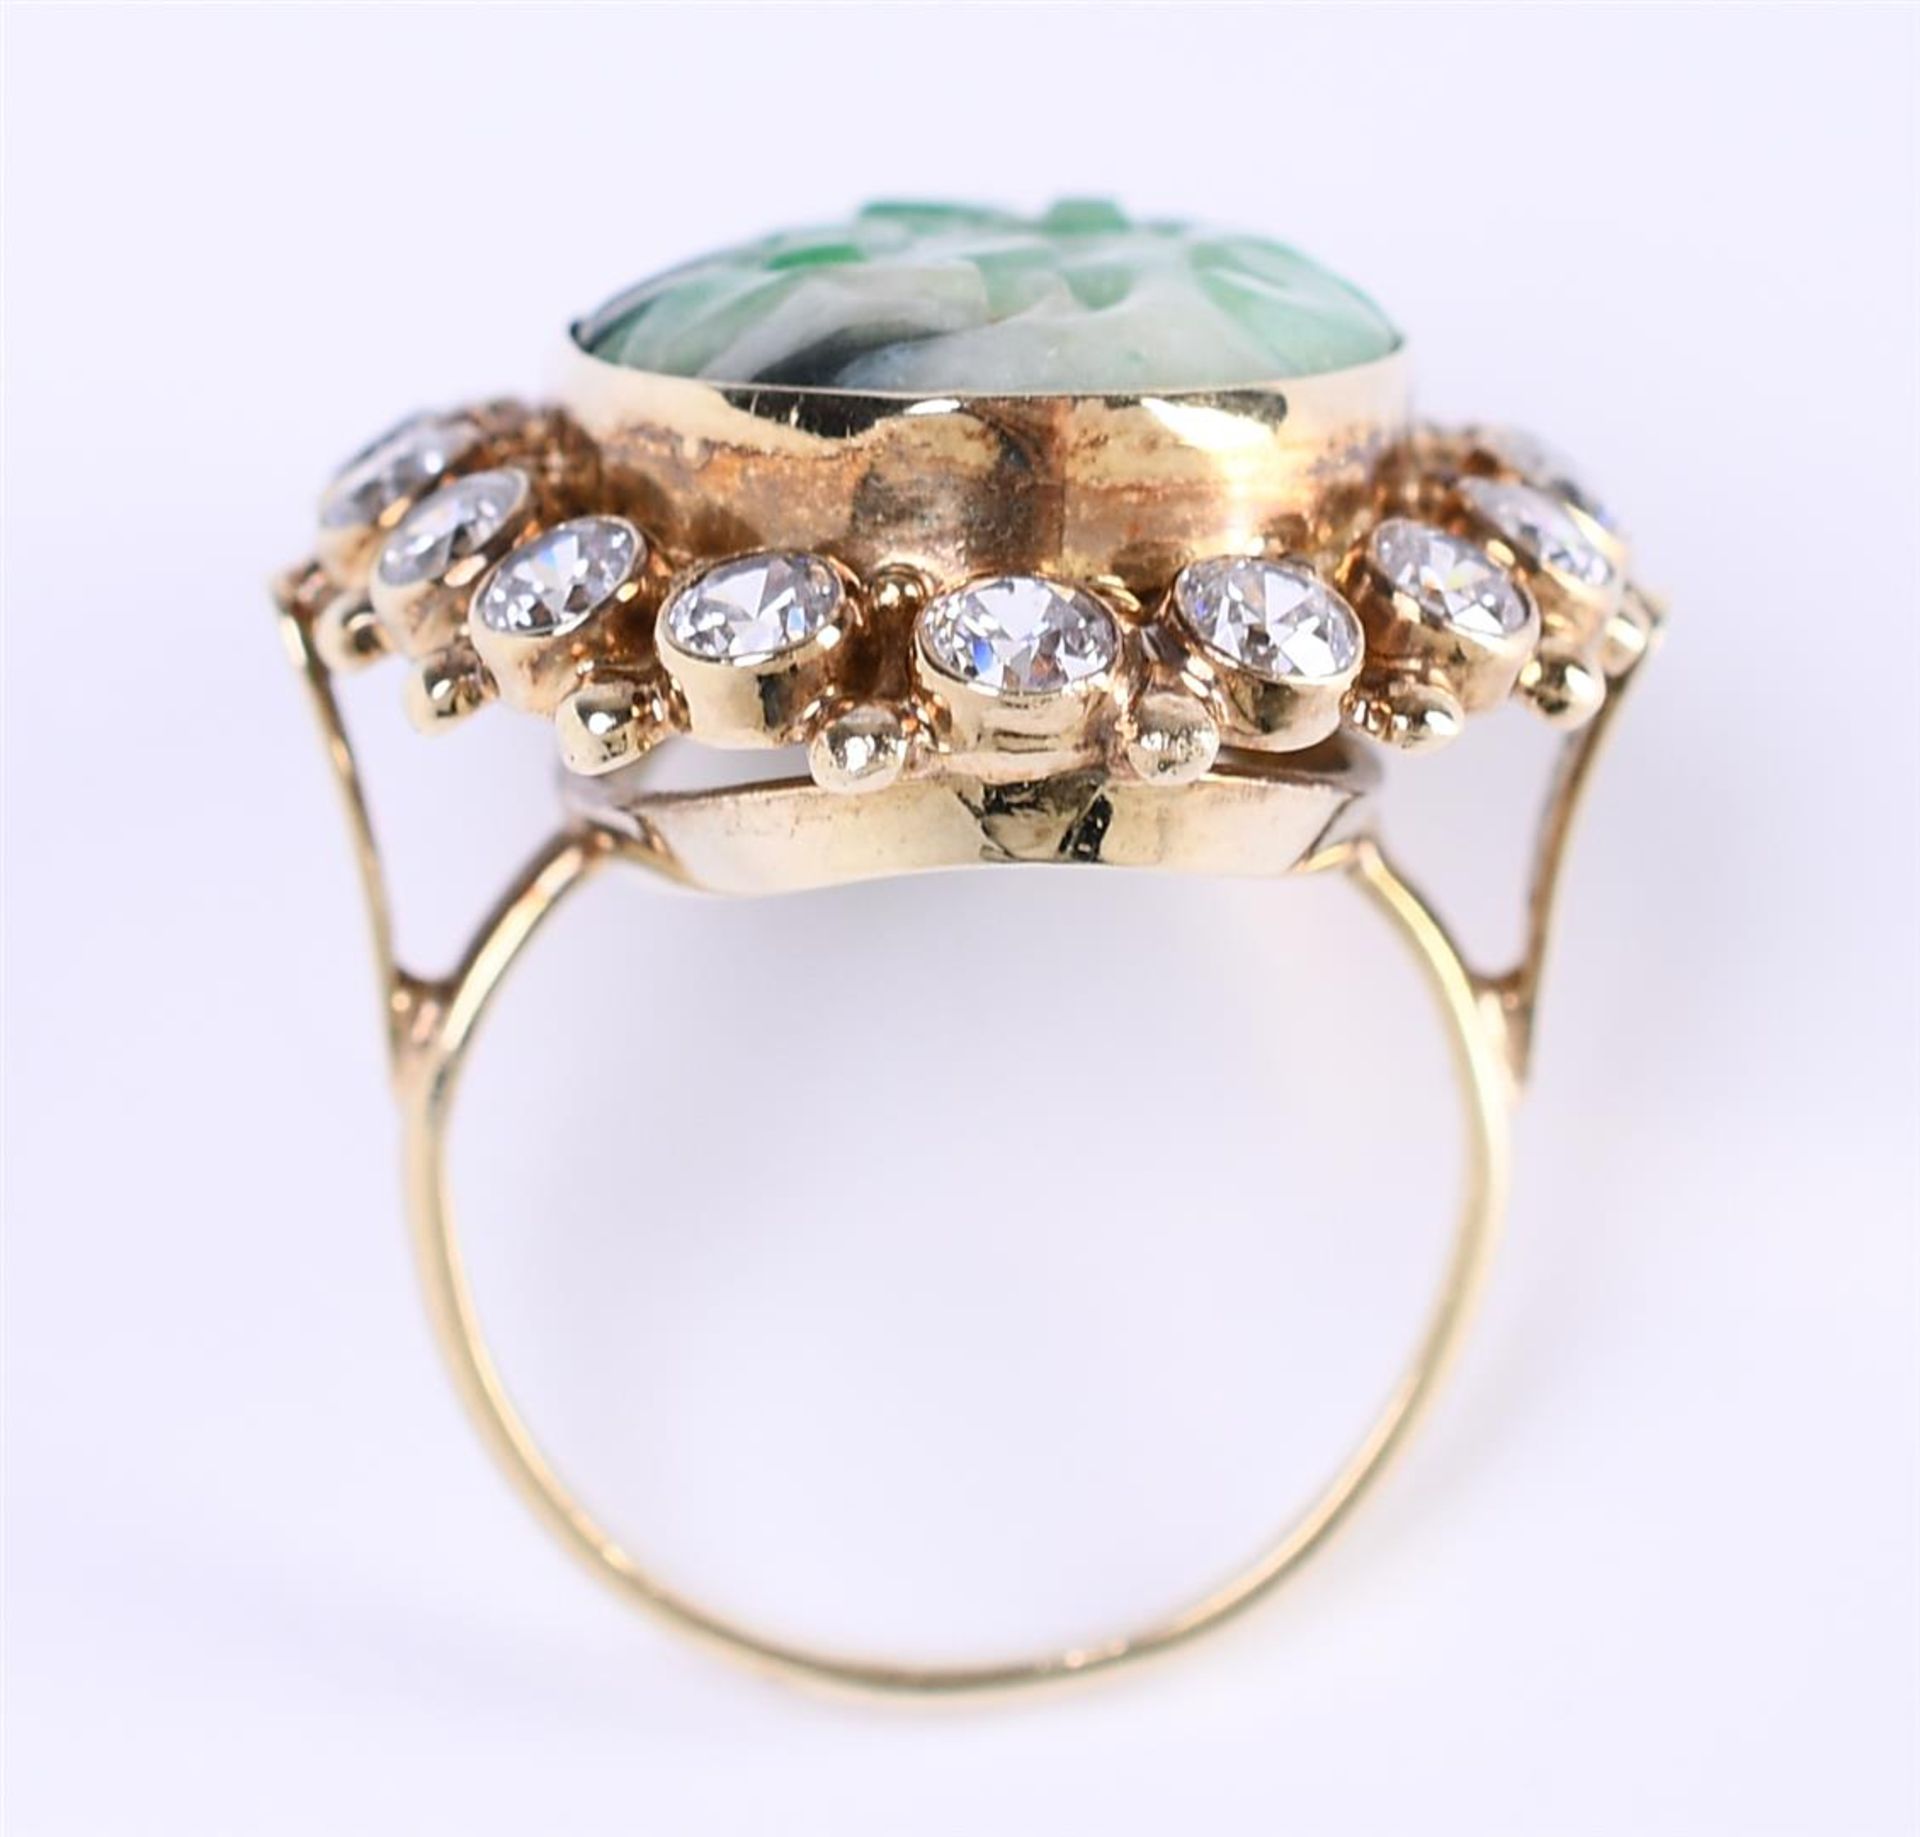 A yellow gold (14 kt) women's ring set with carved jade in the shape of flowers - Image 9 of 10